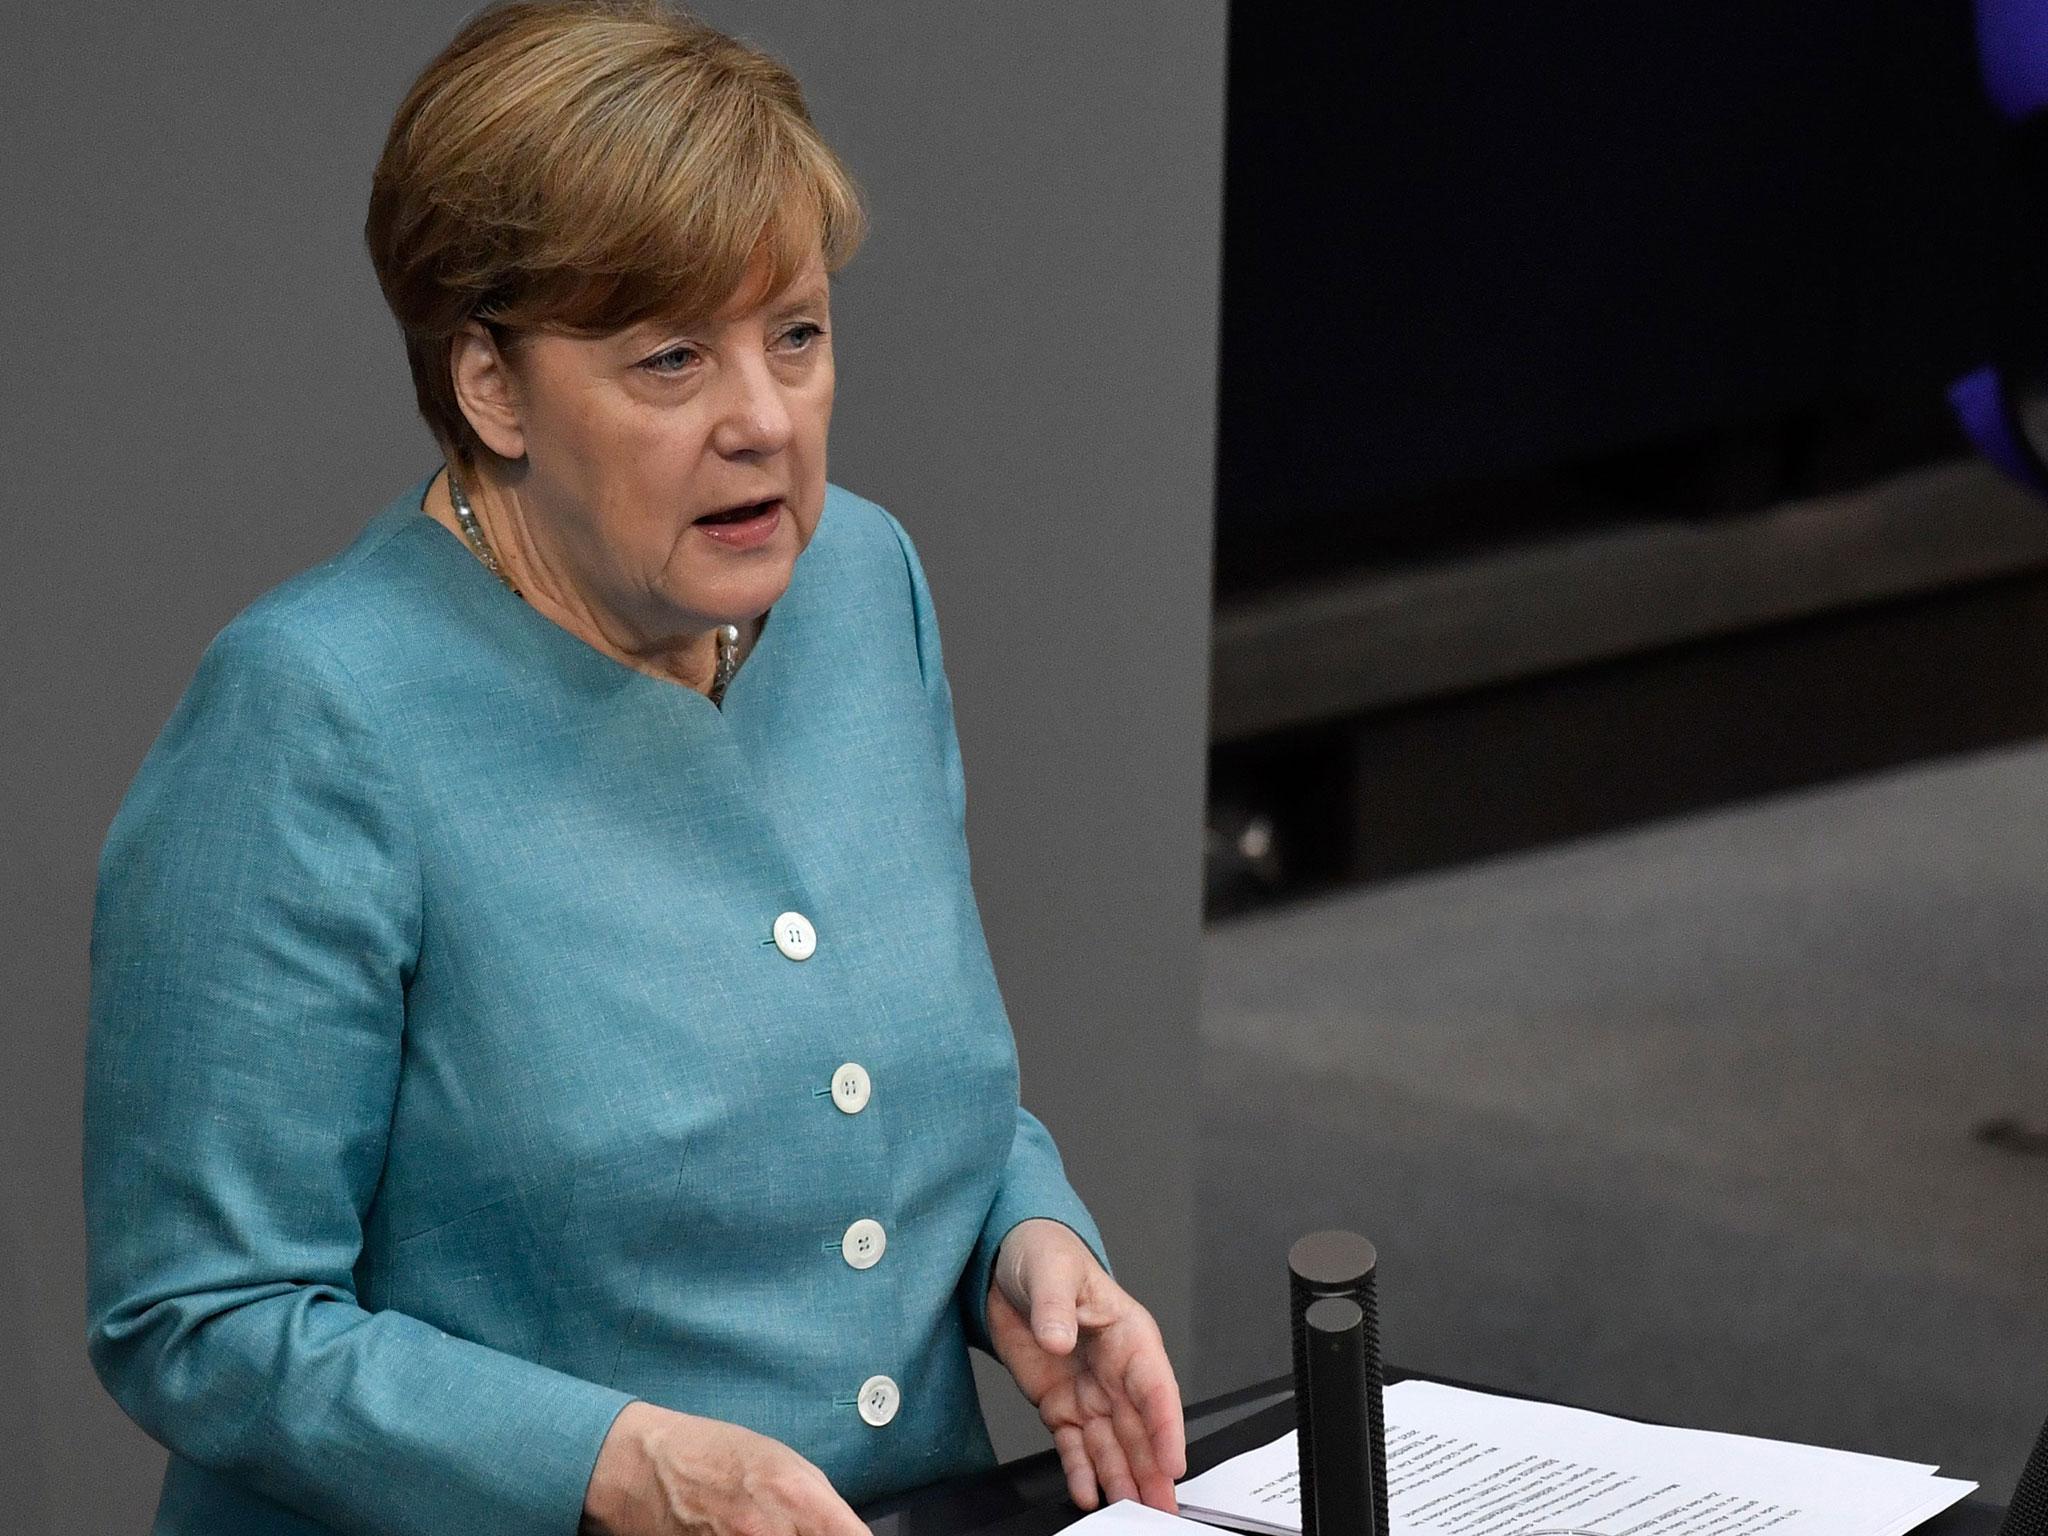 The German Chancellor stressed in a speech to the German parliament the EU stands fully behind its commitment to the Paris climate change agreement 